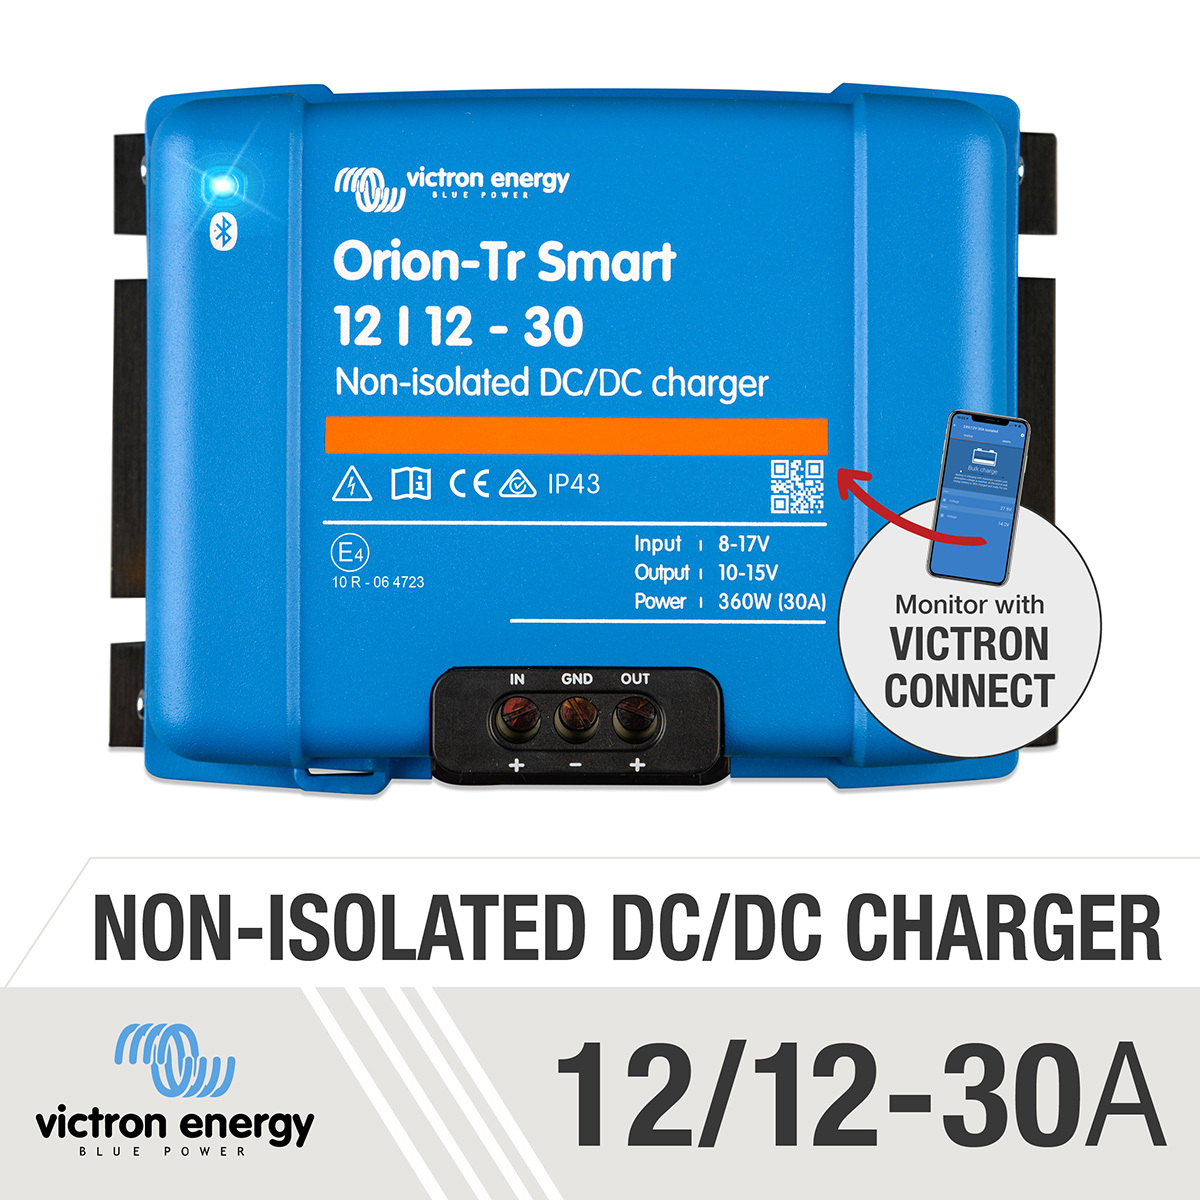 Orion-Tr Smart DC-DC Charger Non-Isolated - Victron Energy